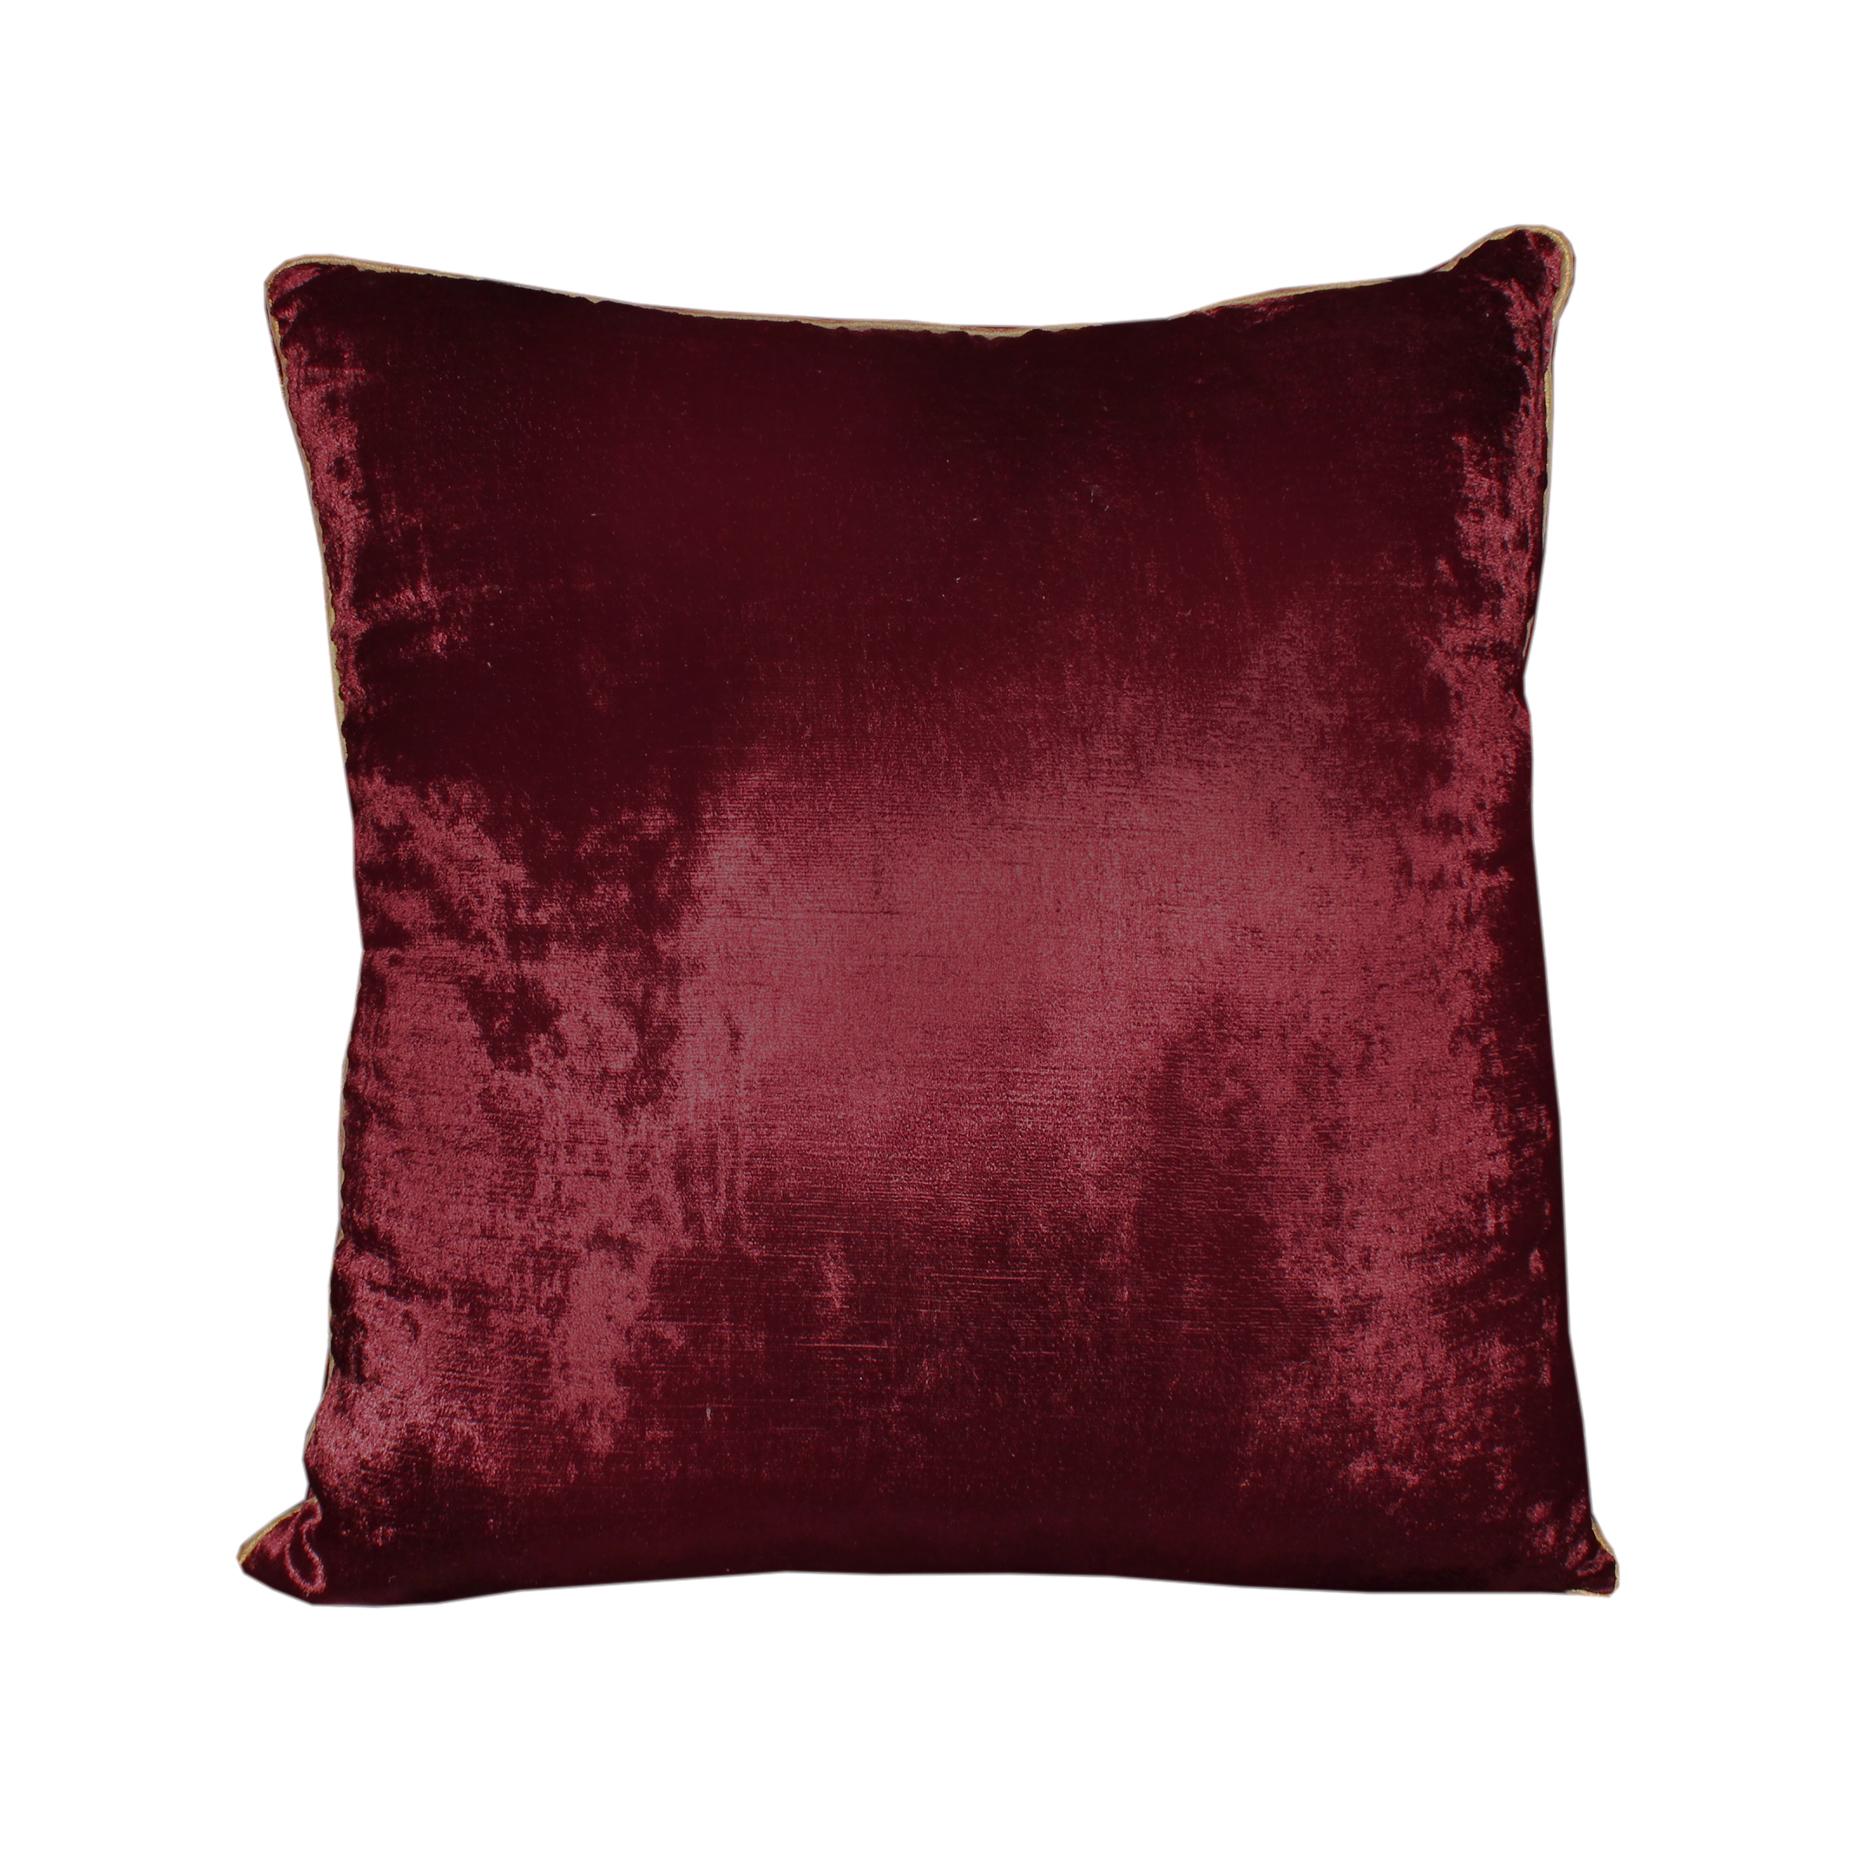 French Large Burgundy Velvet Throw Pillow with Gold Embroidery by Zuber For Sale